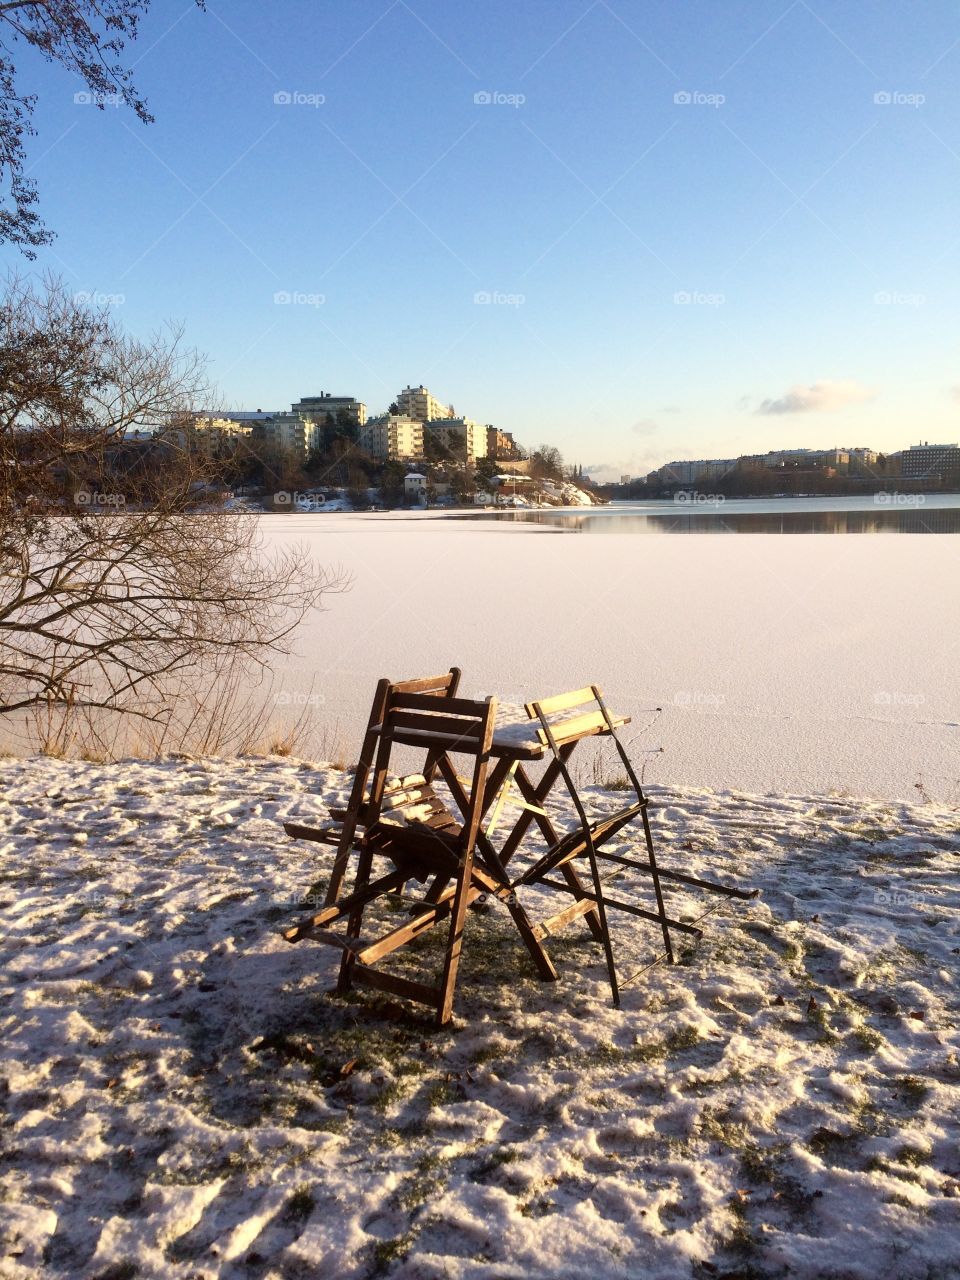 Winter, snow, Stockholm, table, chair in the snow, Sweden